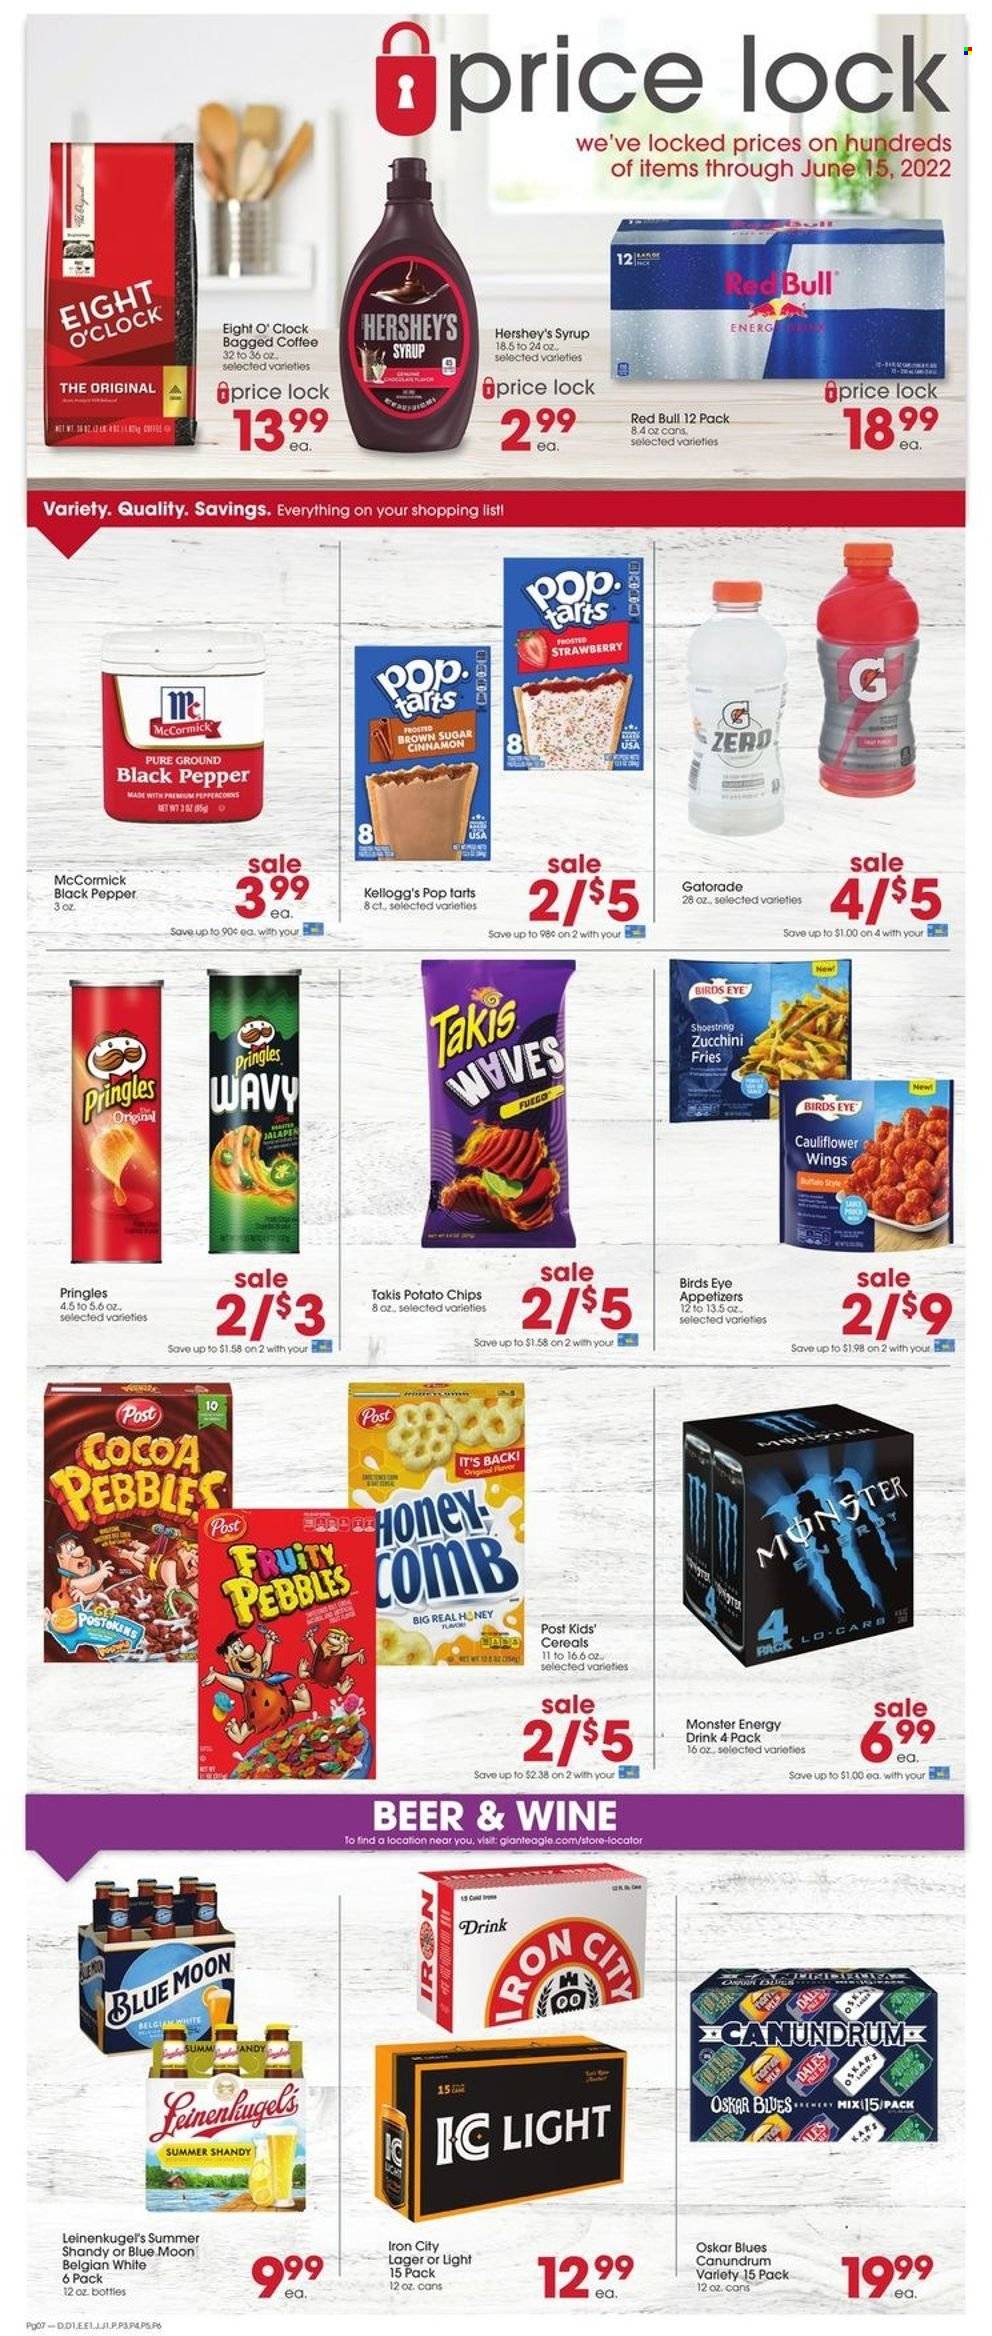 thumbnail - Giant Eagle Flyer - 05/26/2022 - 06/01/2022 - Sales products - zucchini, Hershey's, potato fries, Kellogg's, Pop-Tarts, potato chips, Pringles, chips, cereals, Fruity Pebbles, cinnamon, honey, syrup, energy drink, Red Bull, Monster Energy, Gatorade, bagged coffee, Eight O'Clock, wine, Ron Pelicano, beer, Lager, comb, Leinenkugel's, Blue Moon. Page 7.